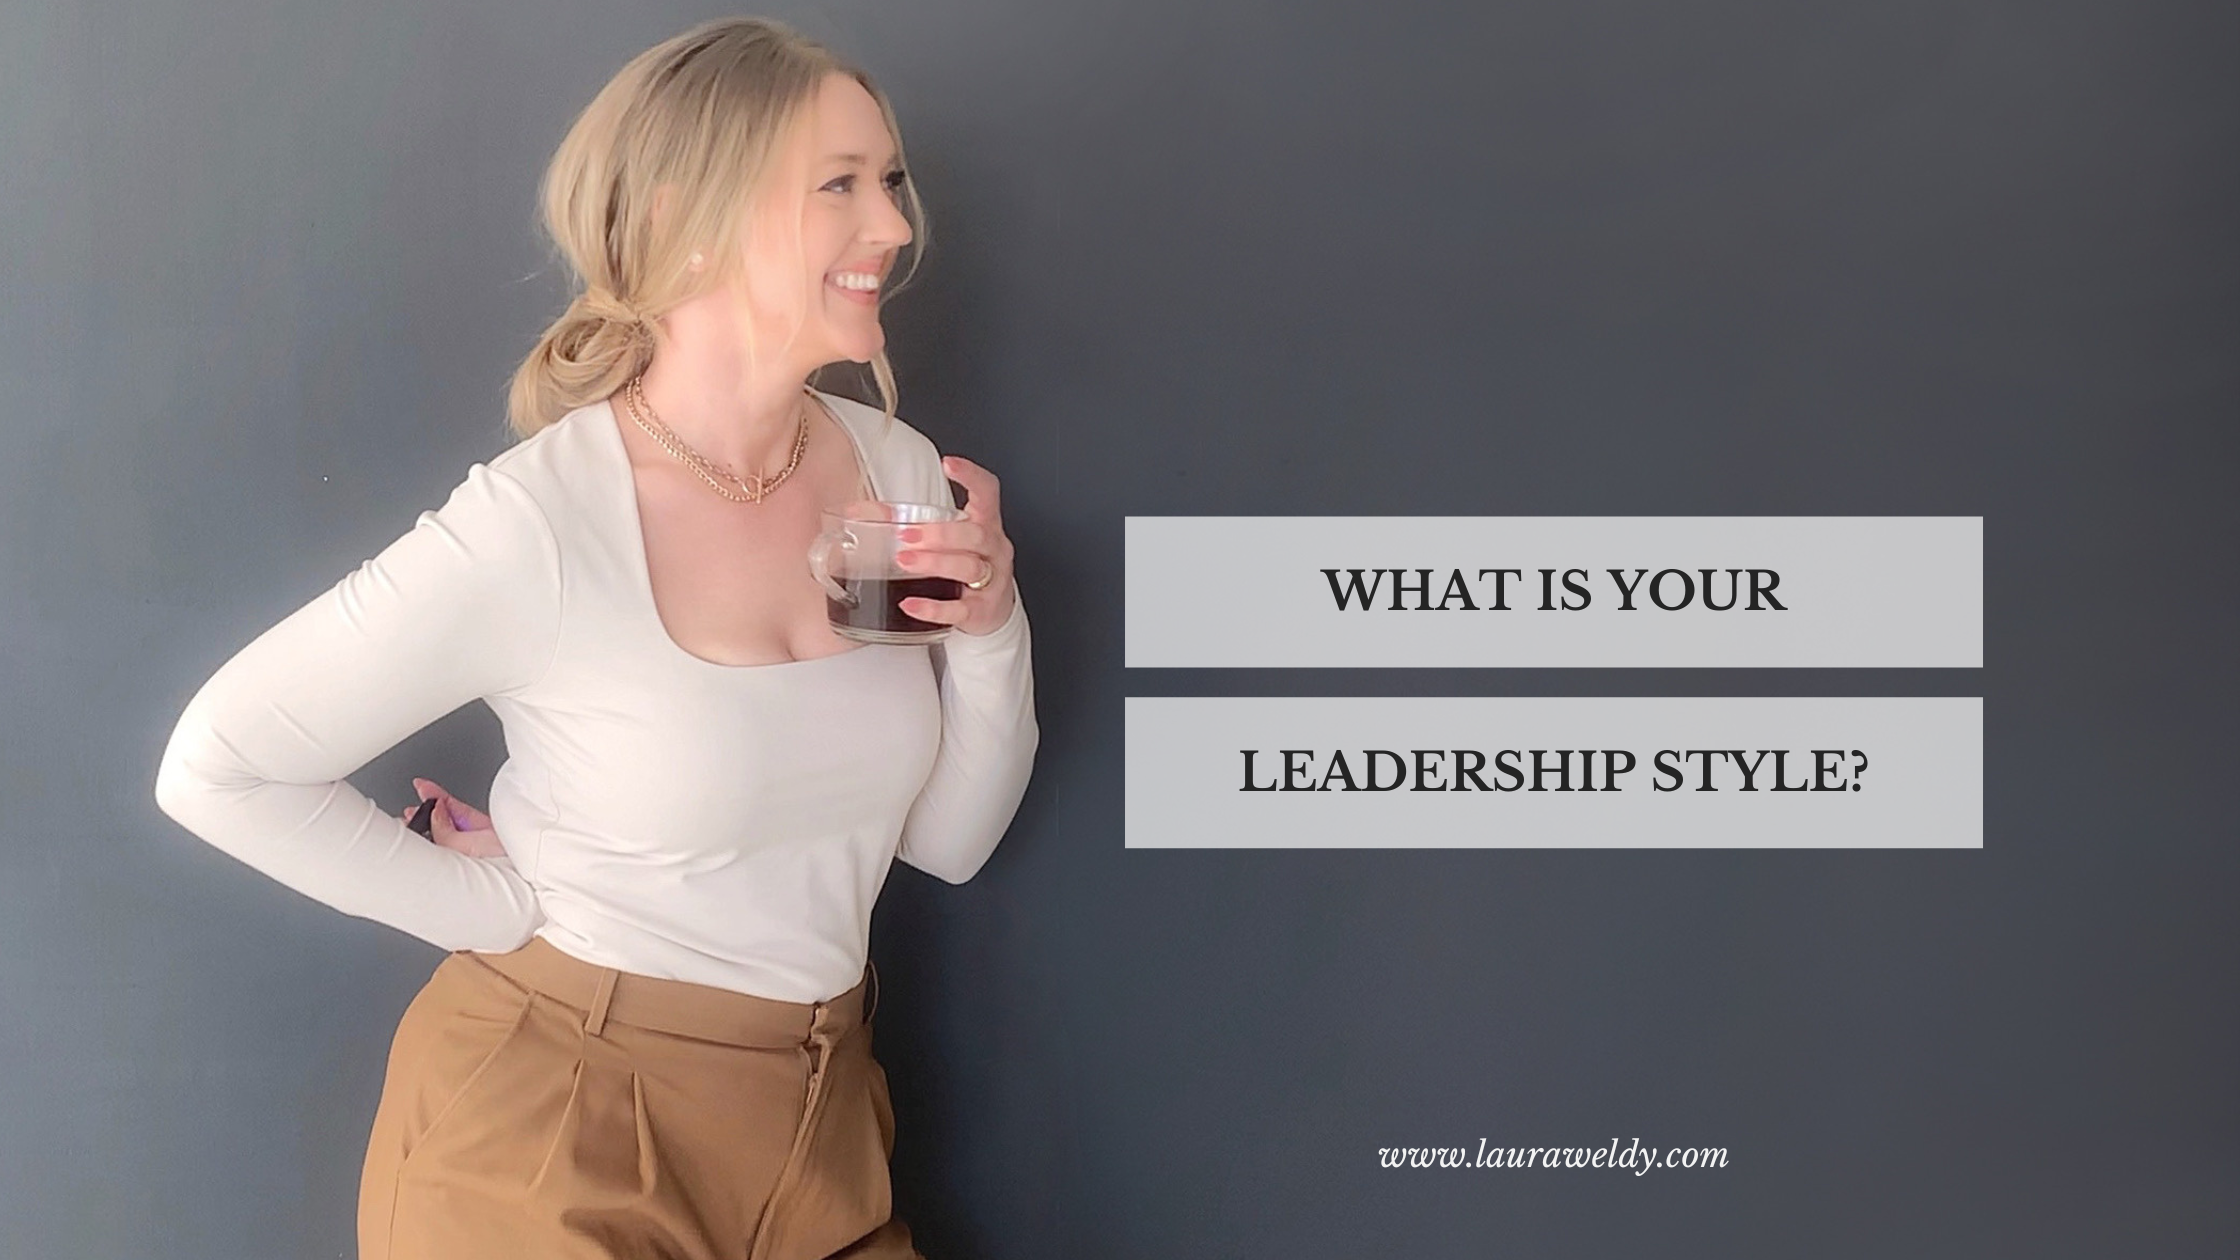 What is your leadership style